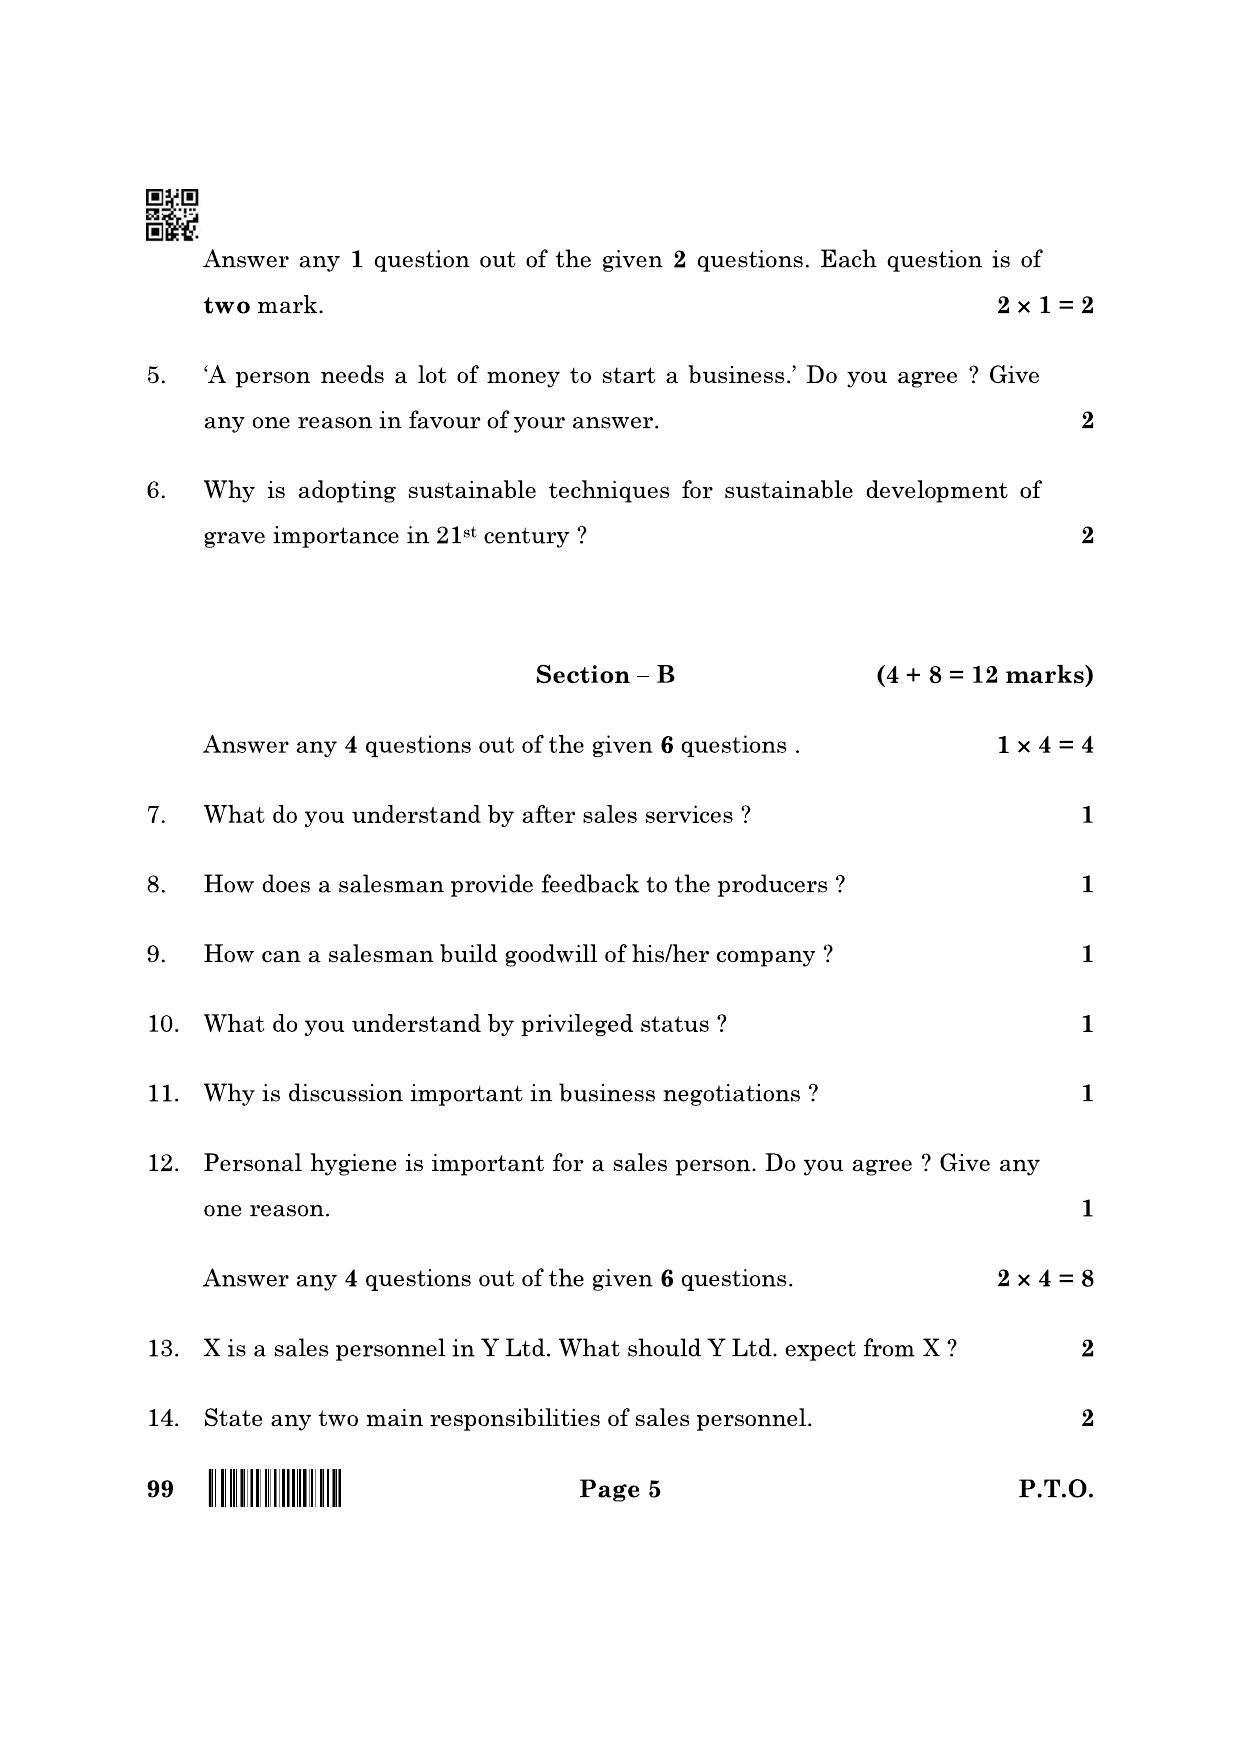 CBSE Class 10 99 Marketing And Sales 2022 Question Paper - Page 5